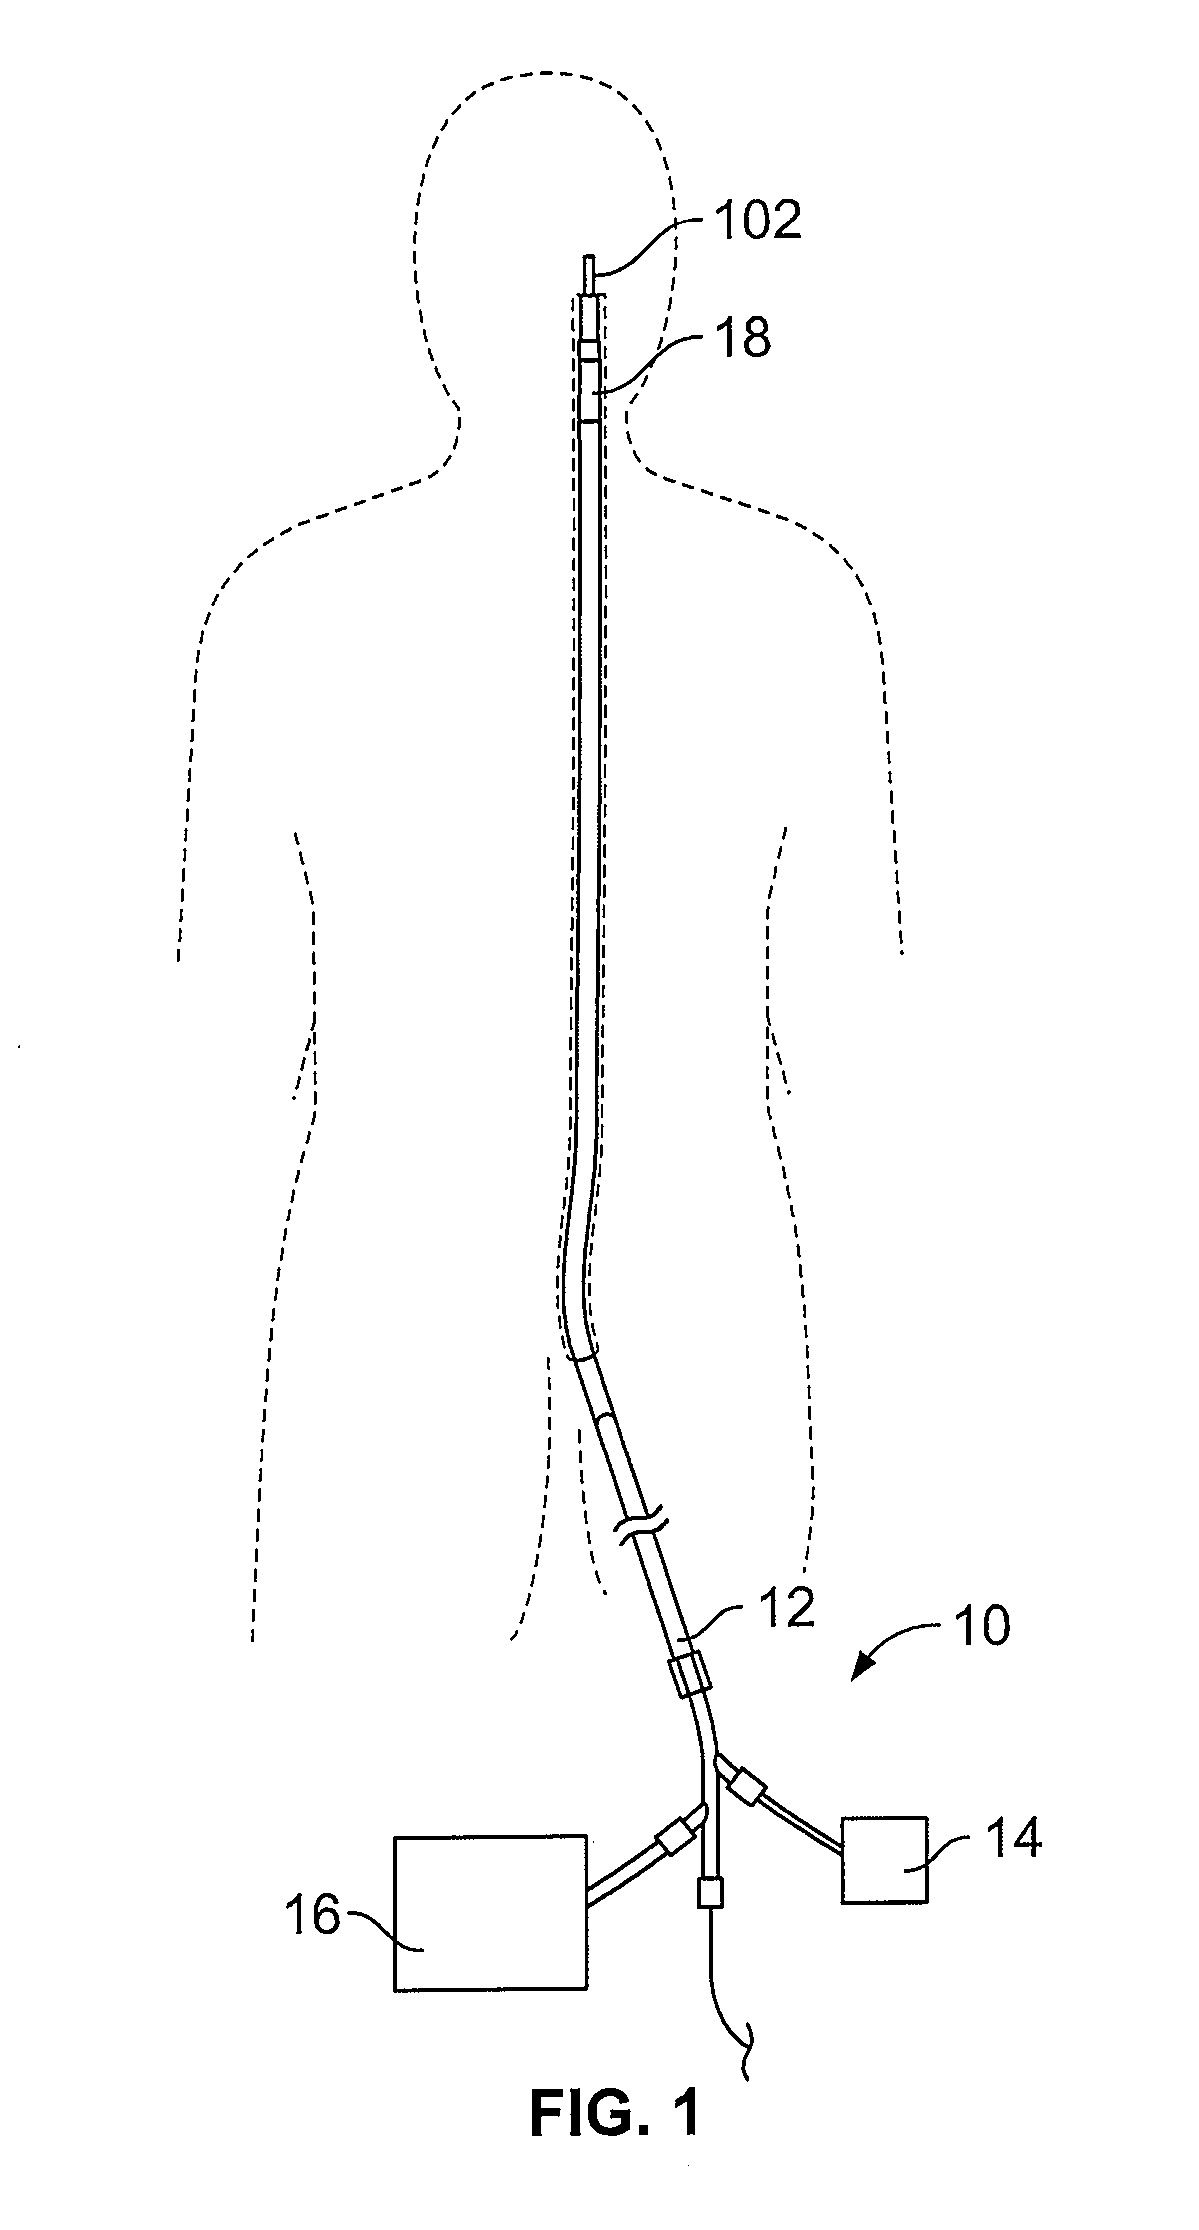 Devices for restoring blood flow within blocked vasculature